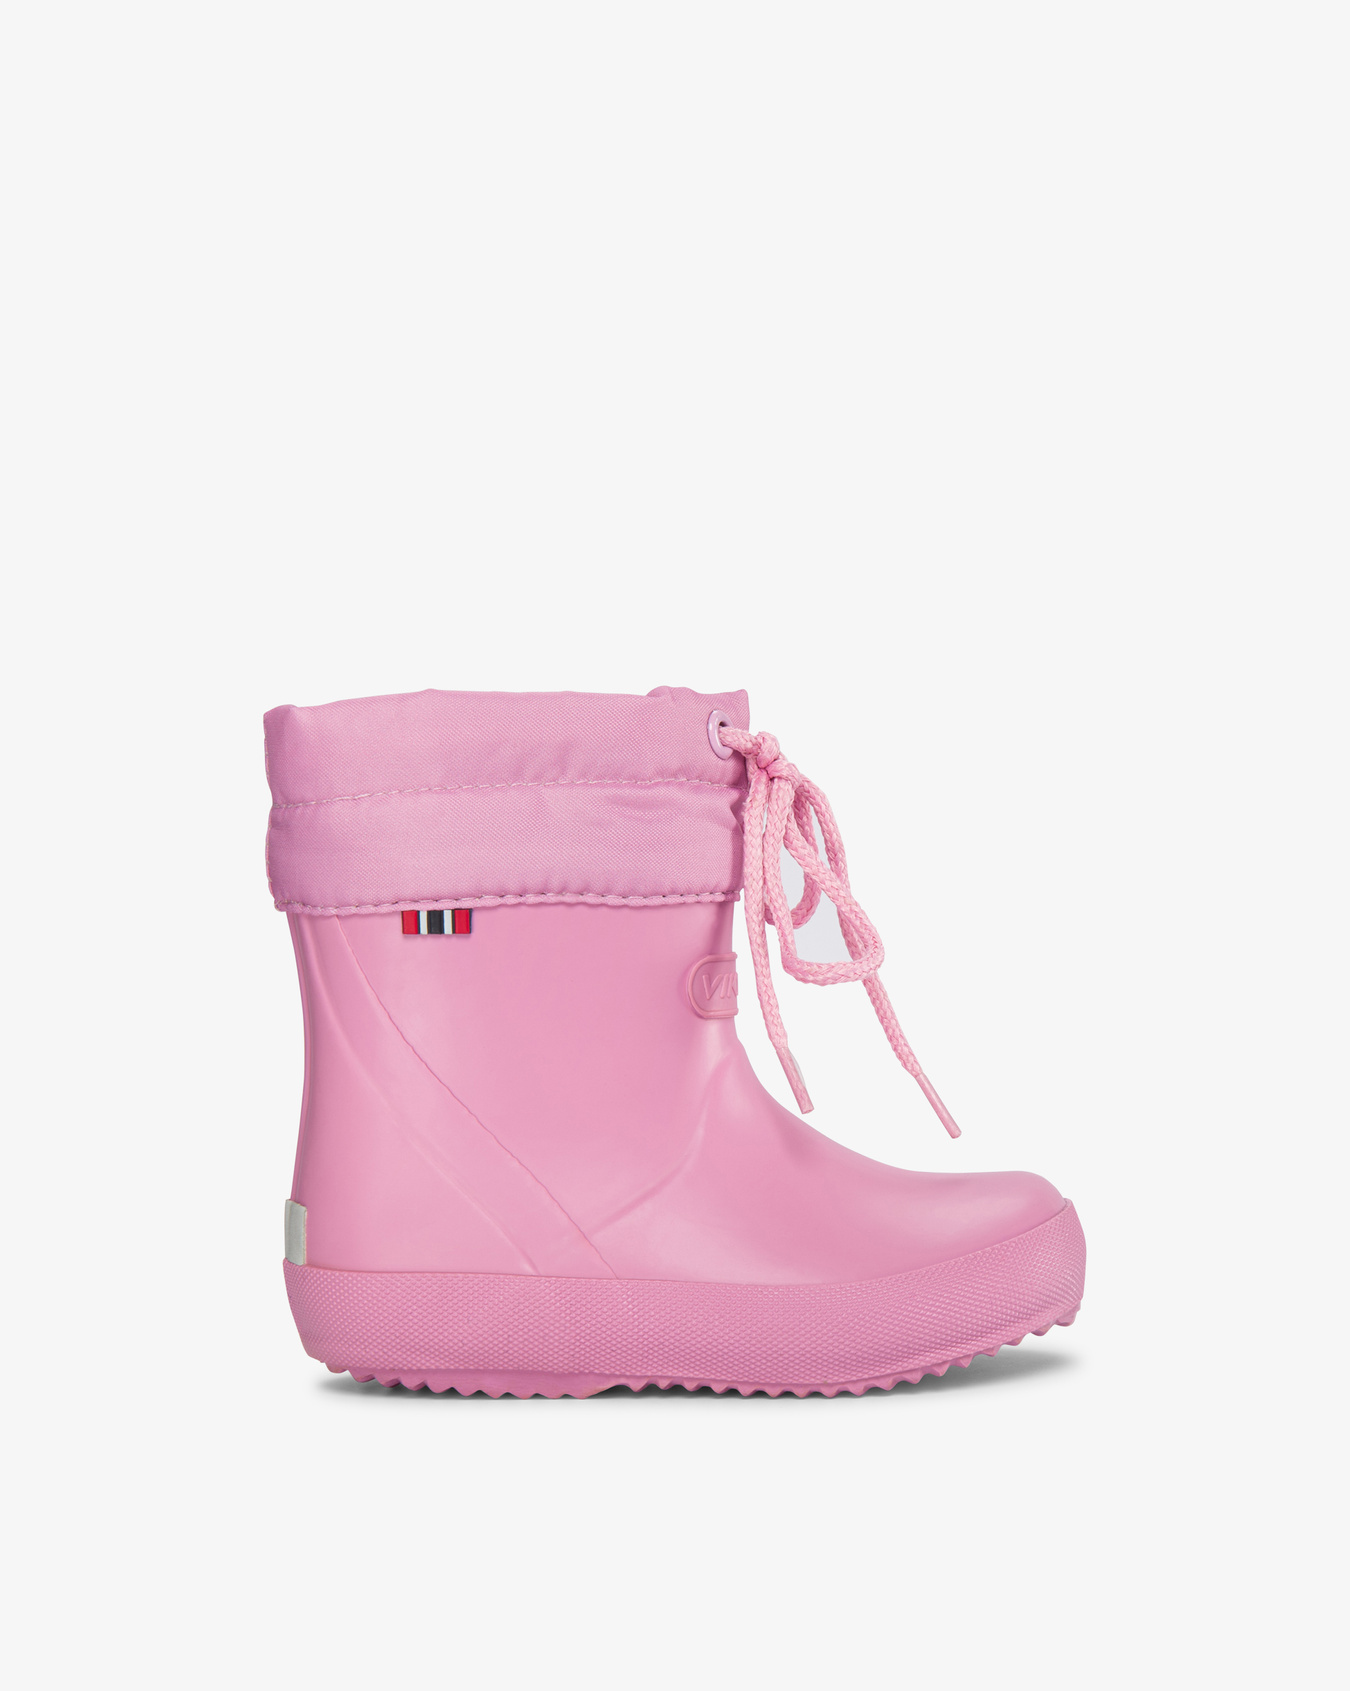 Alv Indie Kids Rubber Boots